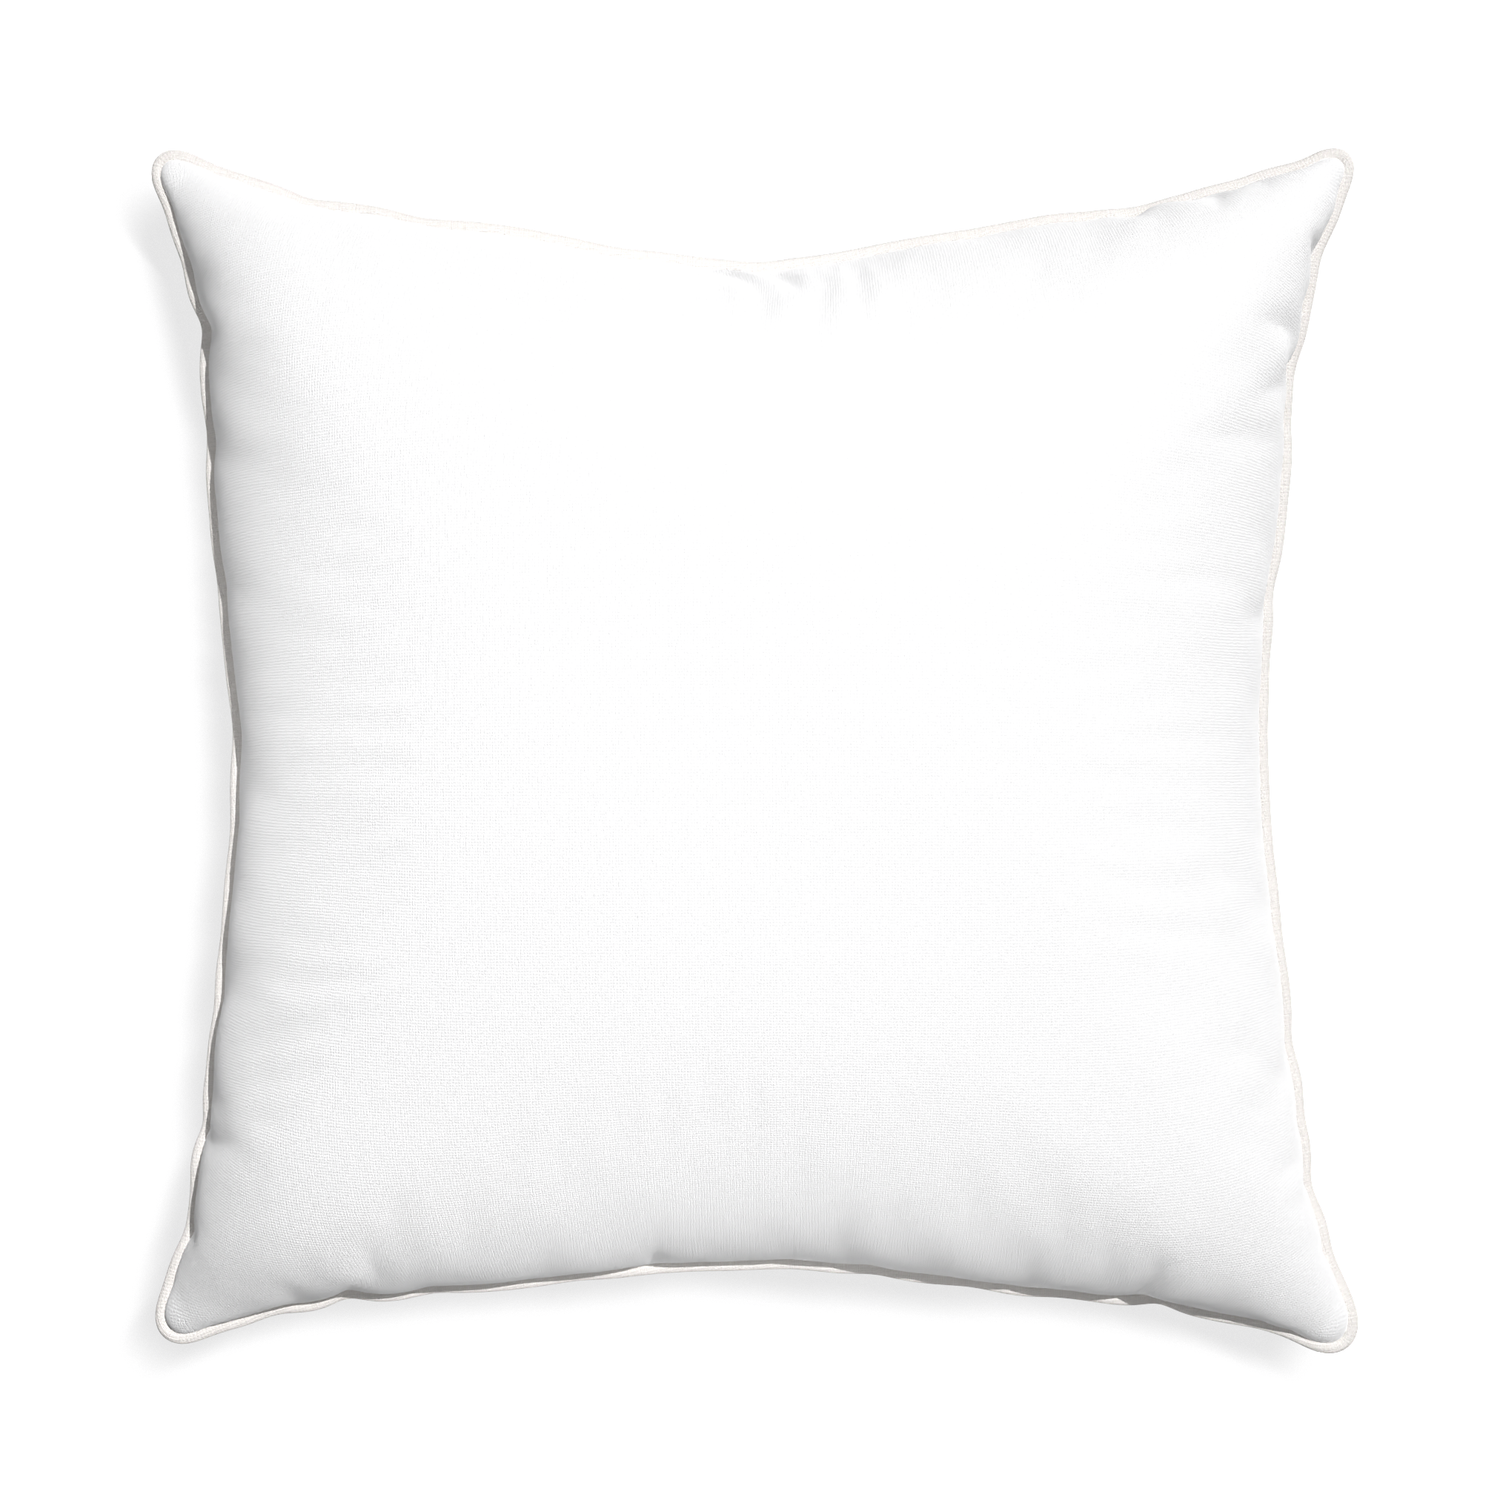 Euro-sham snow custom pillow with snow piping on white background